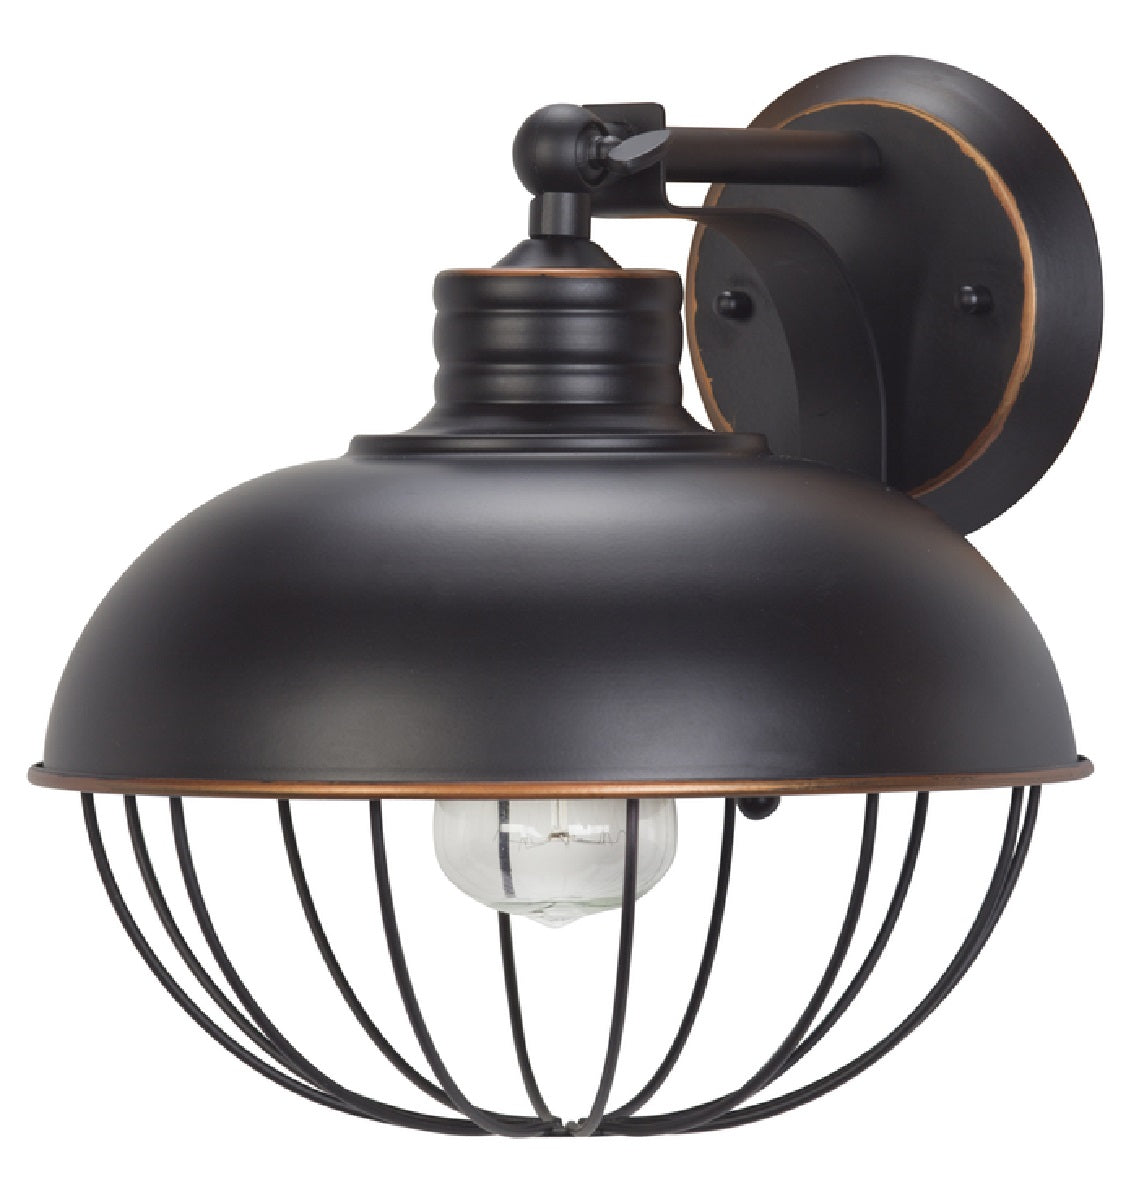 buy wall mount light fixtures at cheap rate in bulk. wholesale & retail outdoor lighting products store. home décor ideas, maintenance, repair replacement parts